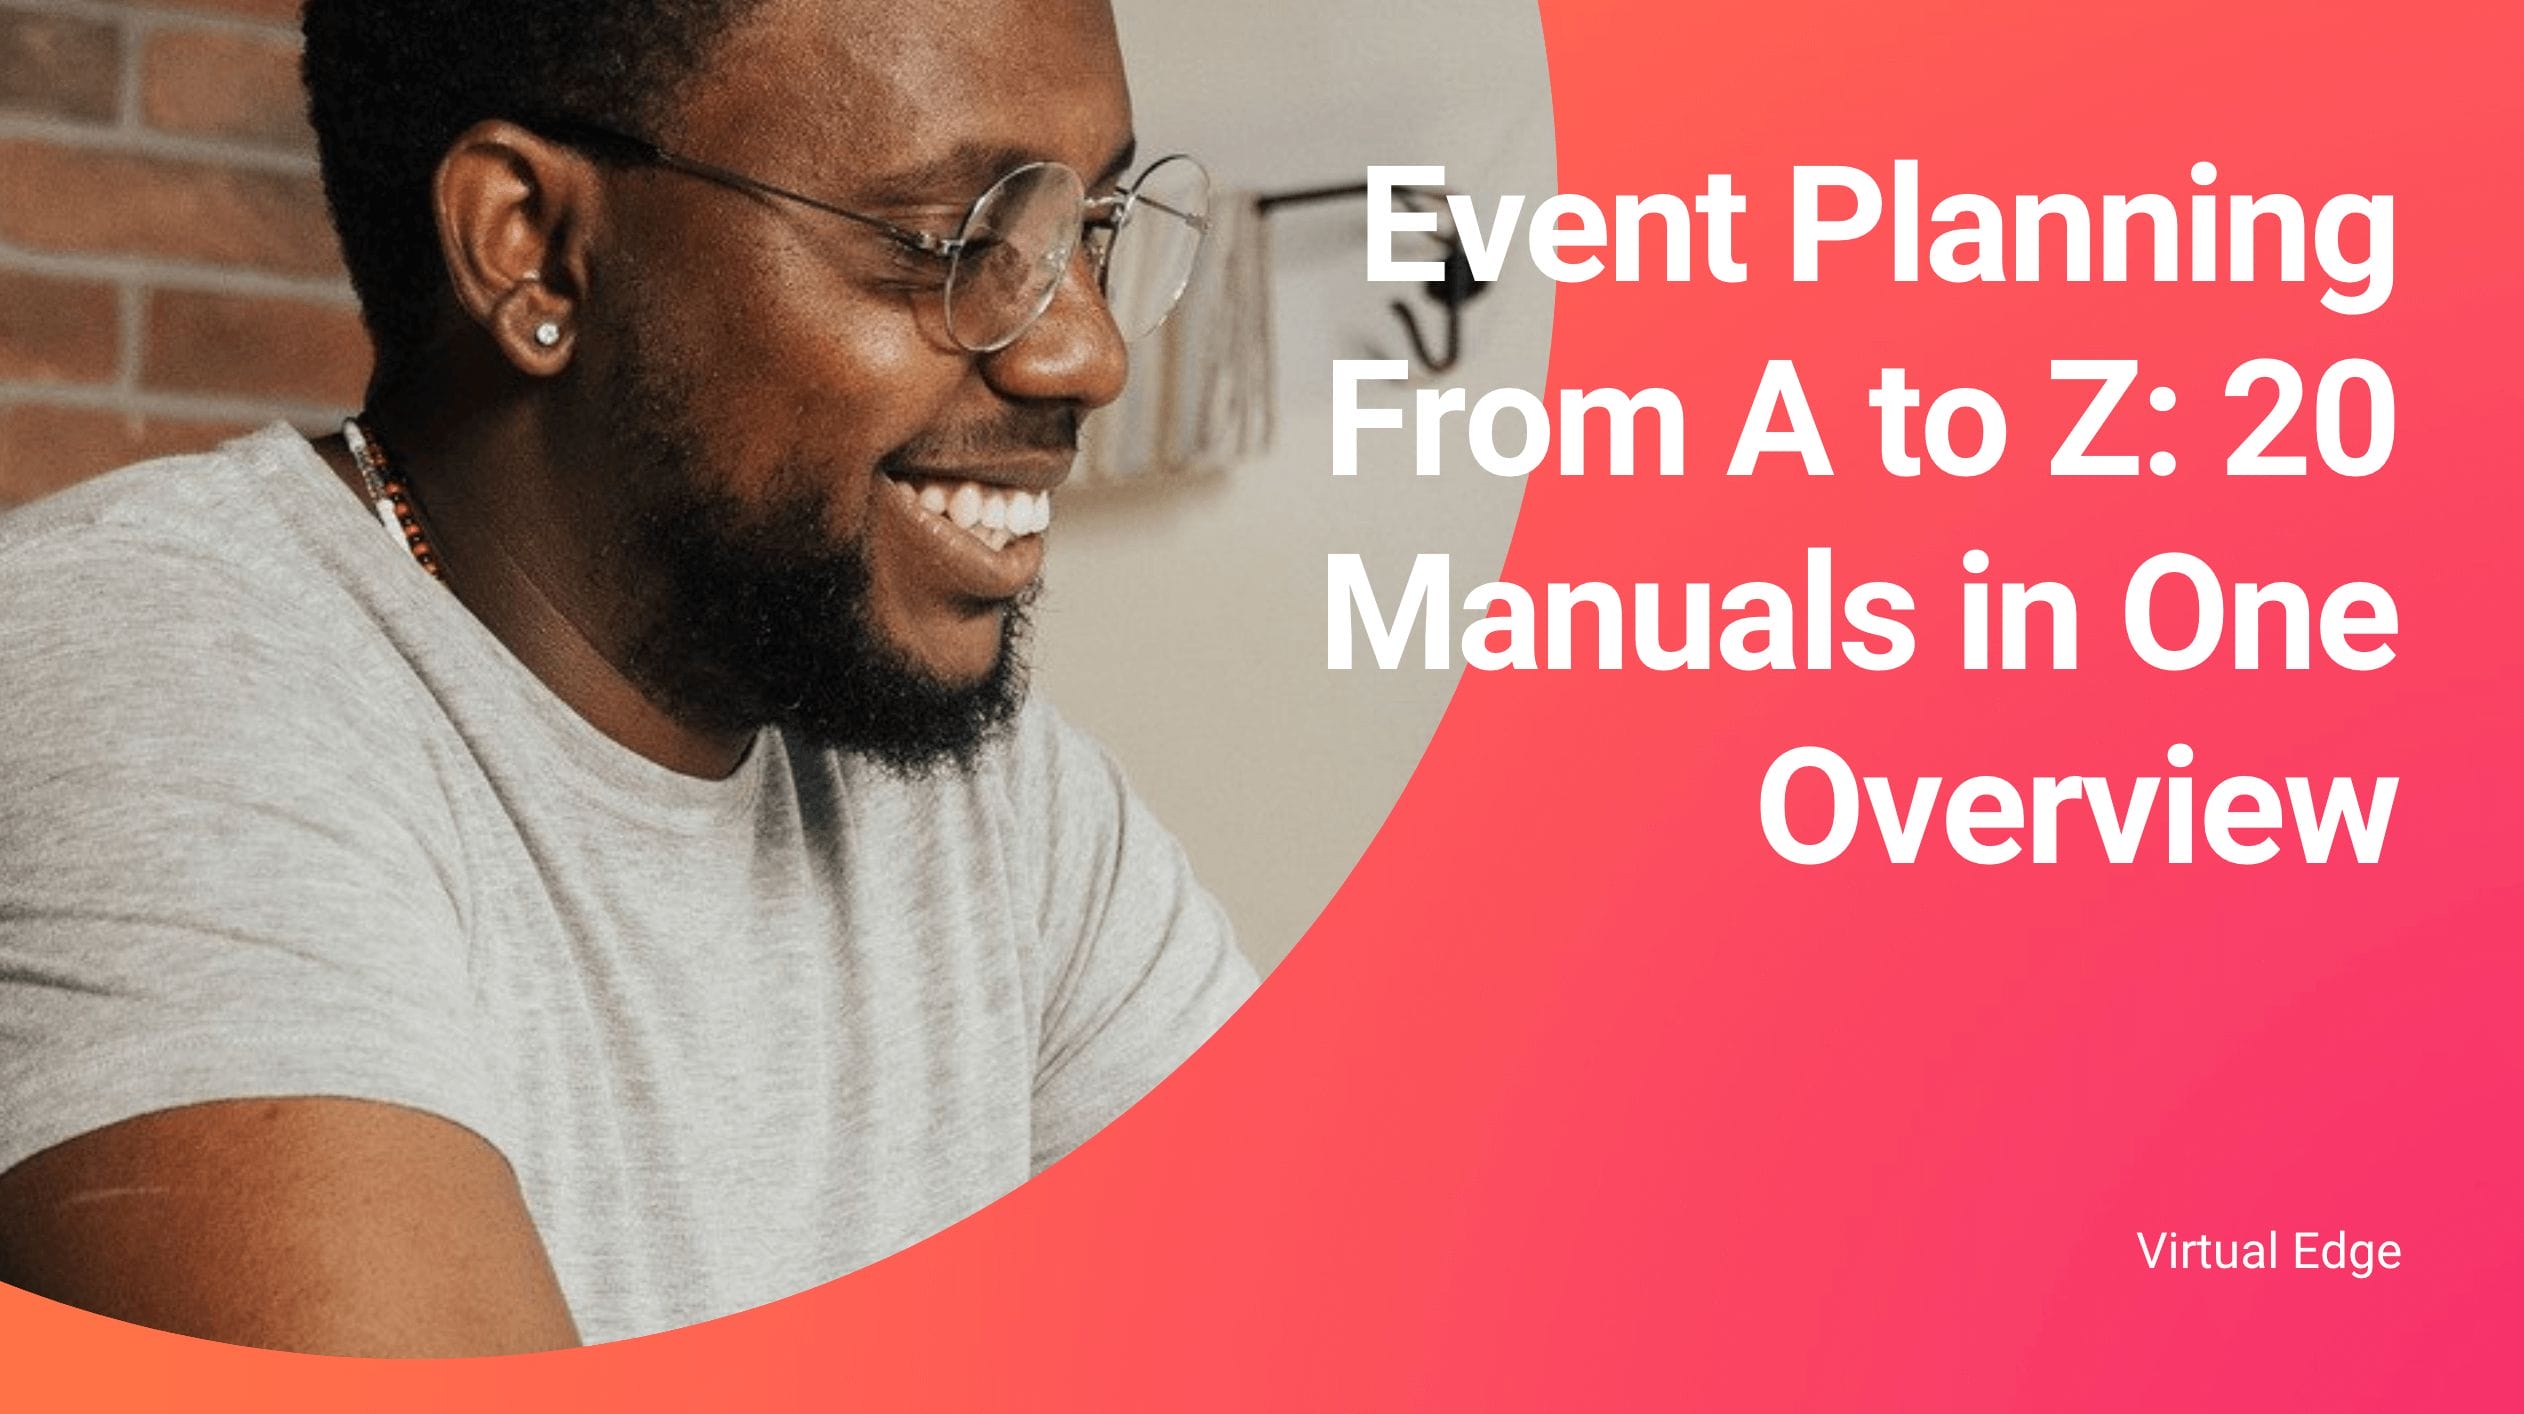 Event Planning From A to Z: 20 Manuals in One Overview